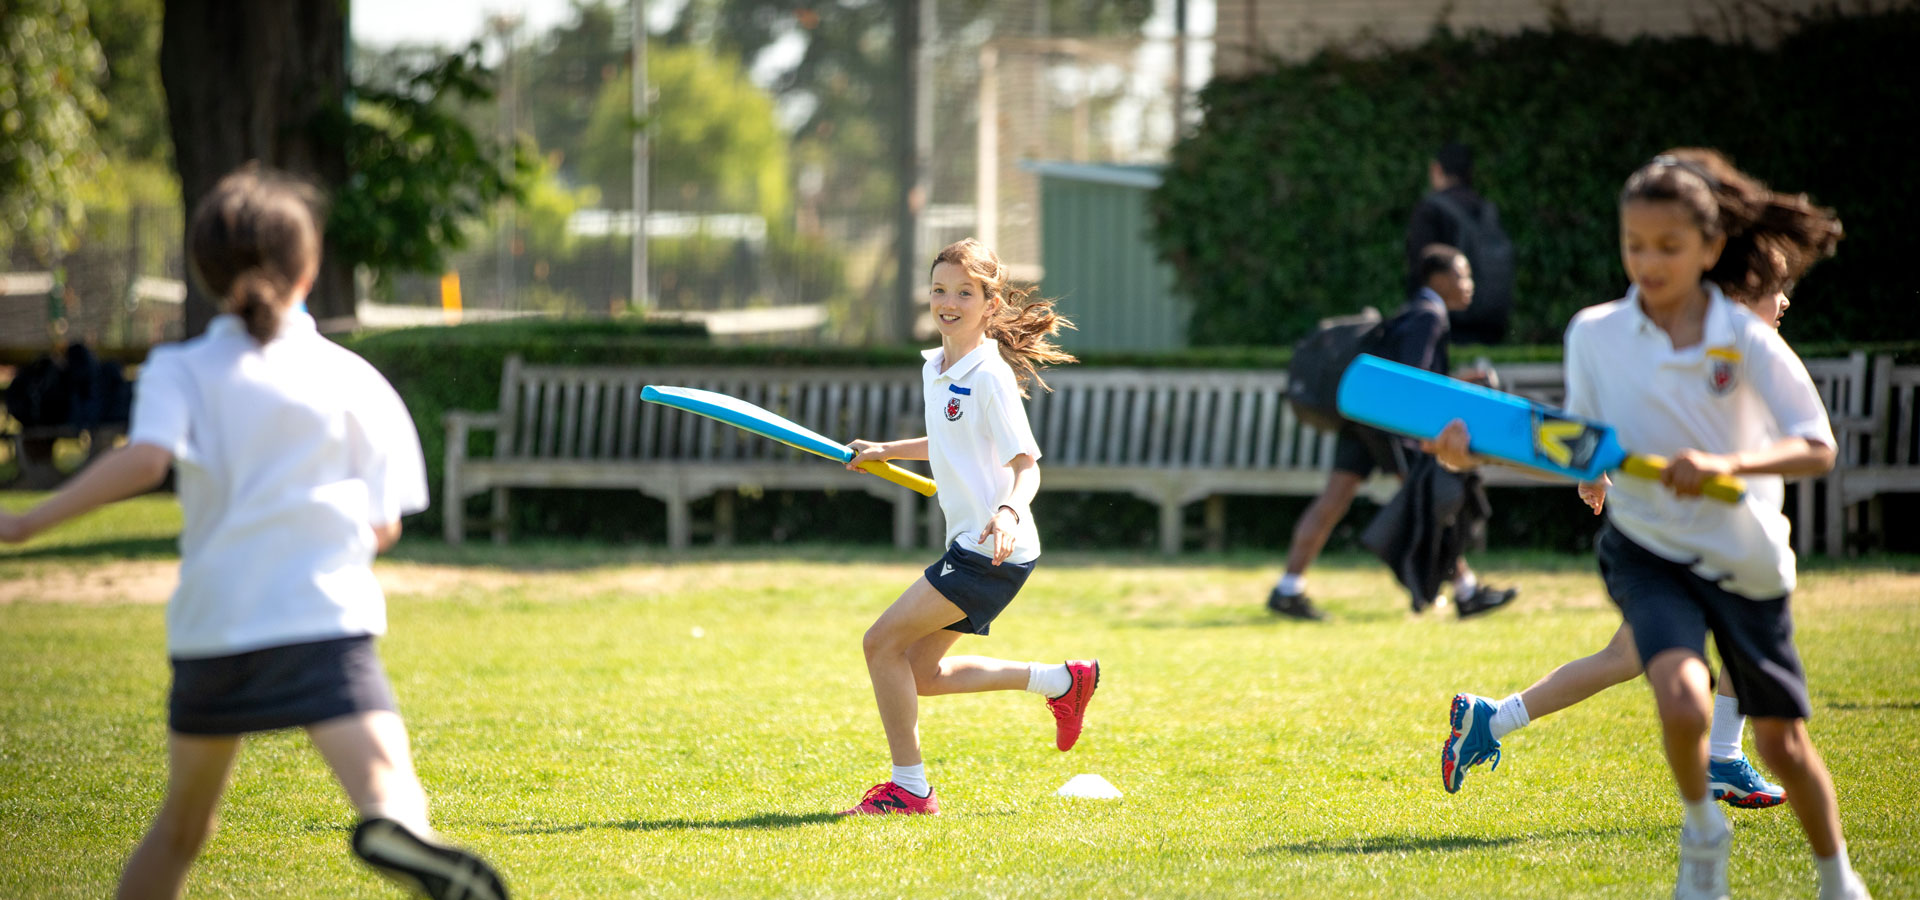 Junior school students playing sports on the Alleyn's sports facilities.